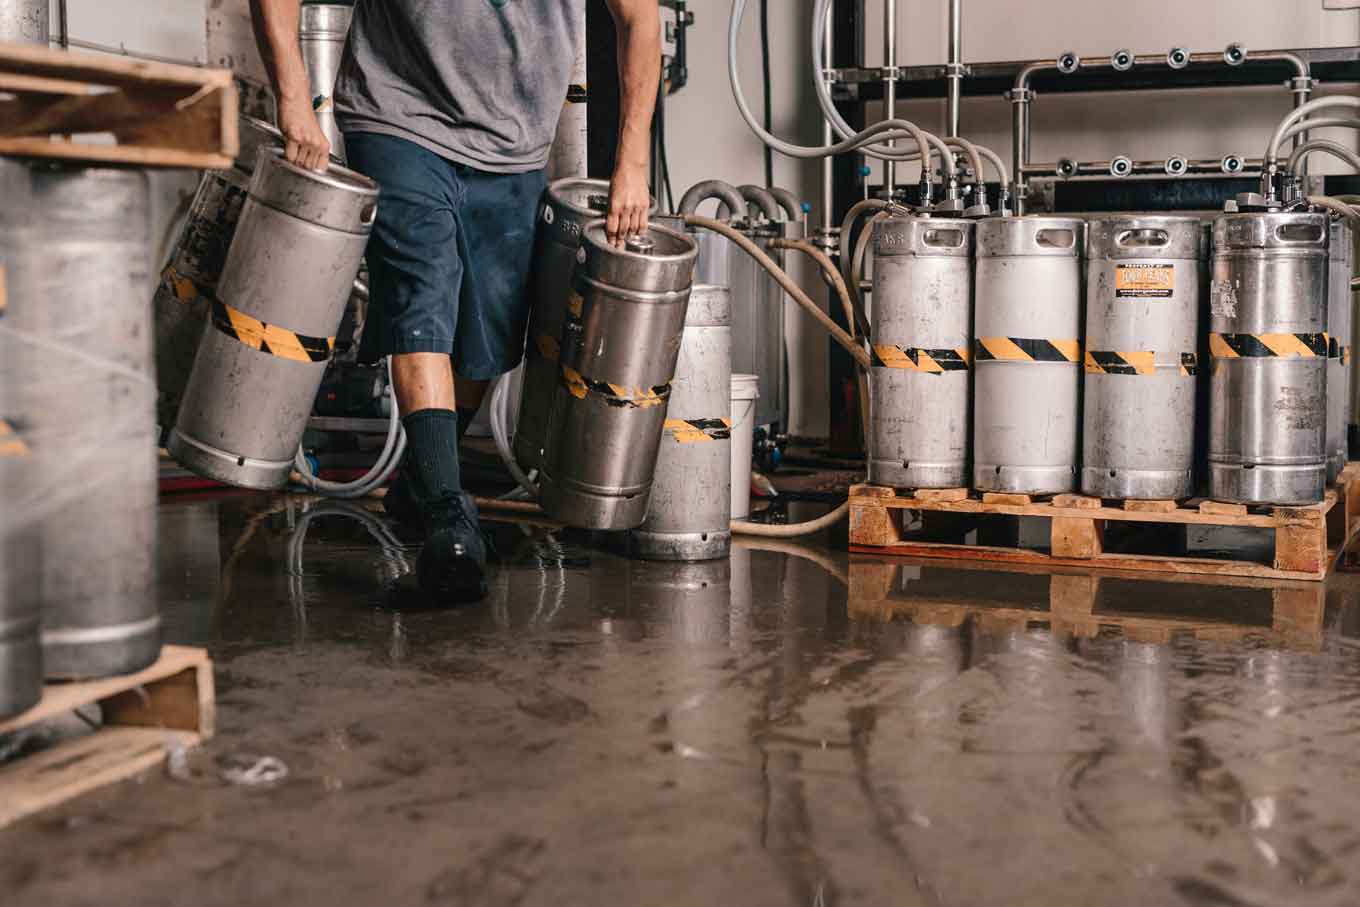 A brewery worker carrying tanks in an industrial brewery.